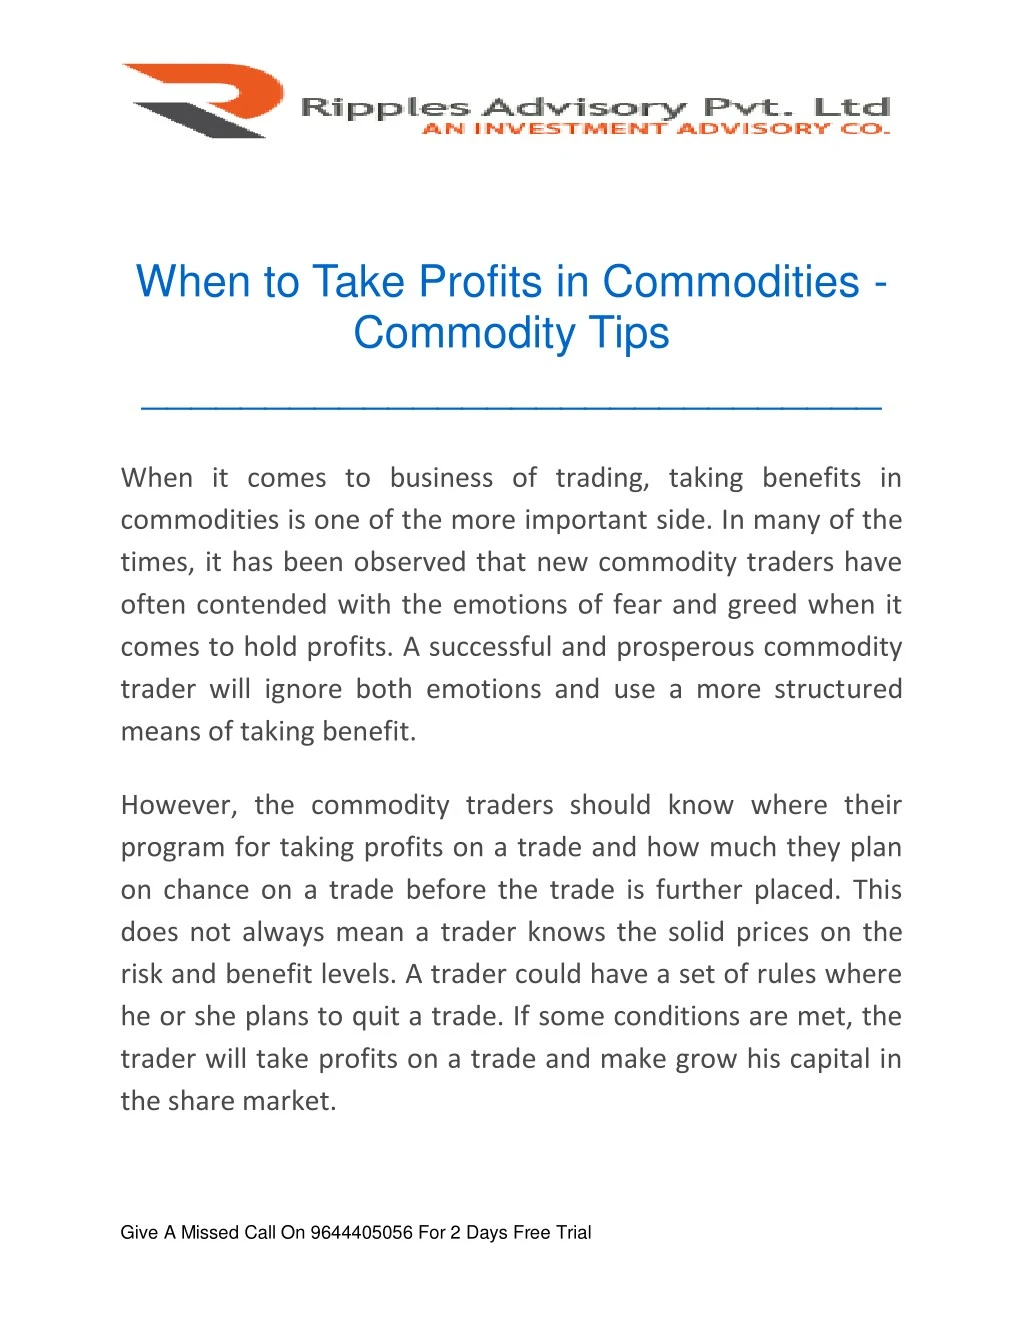 when to take profits in commodities commodity tips